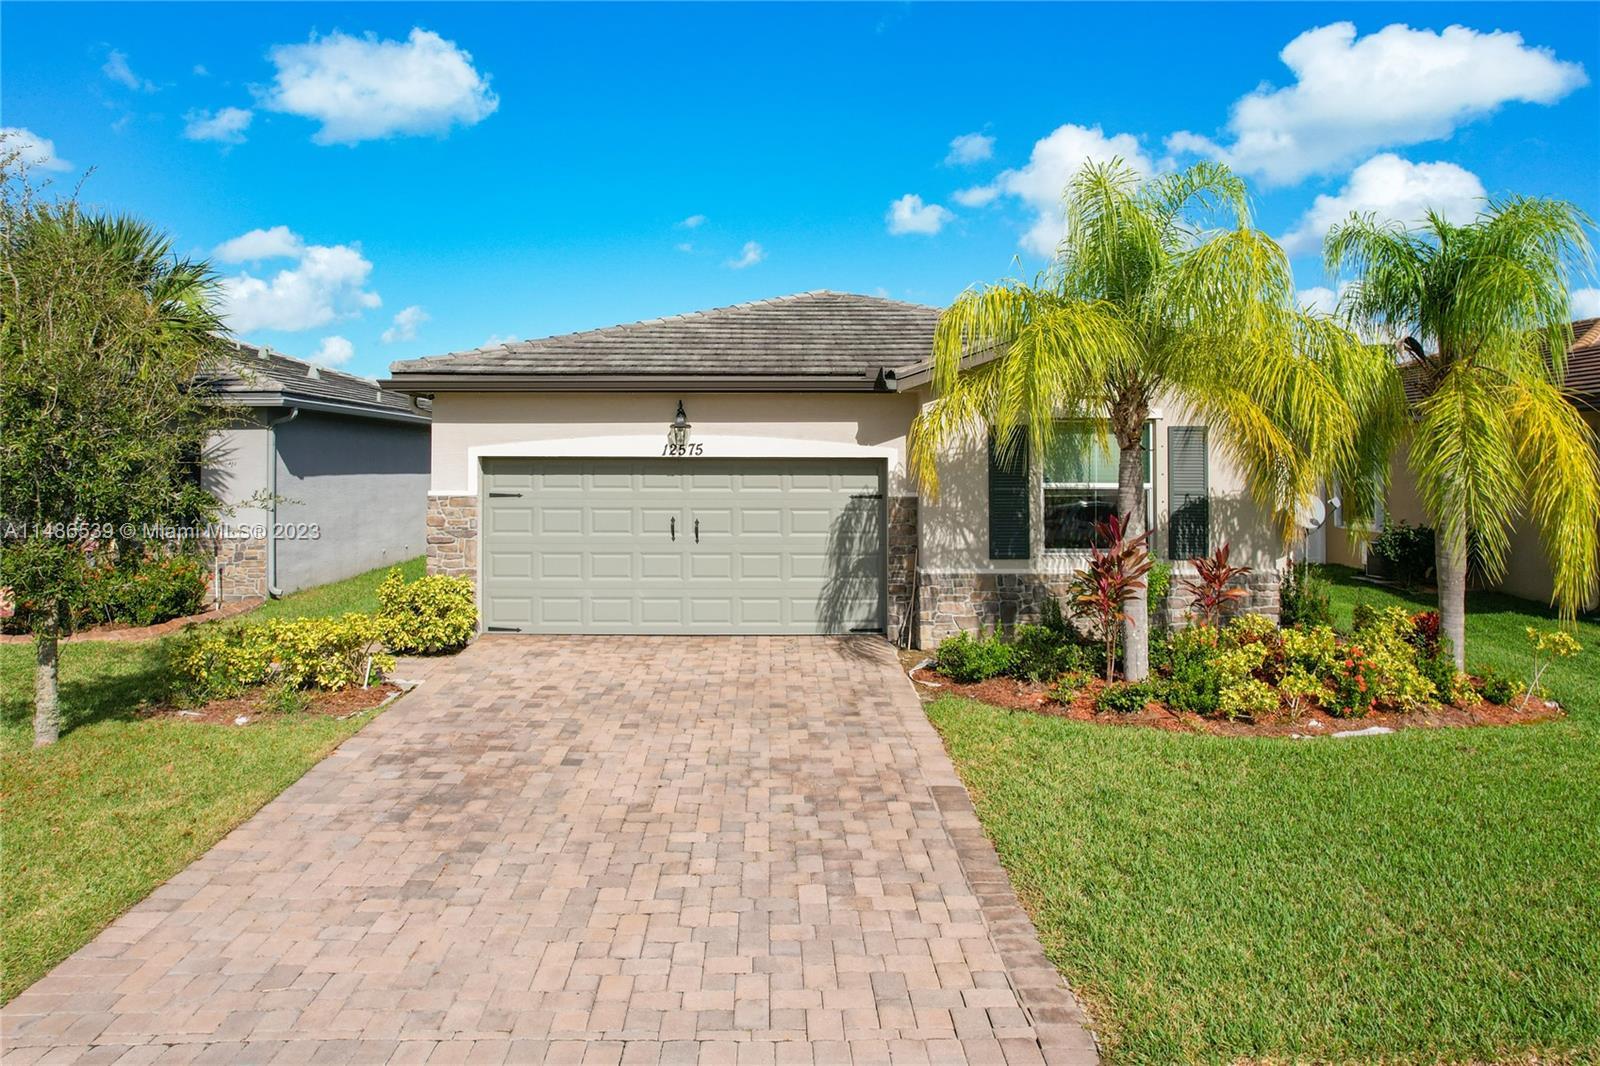 Photo of 12575 NW Toblin Ln in Port St Lucie, FL